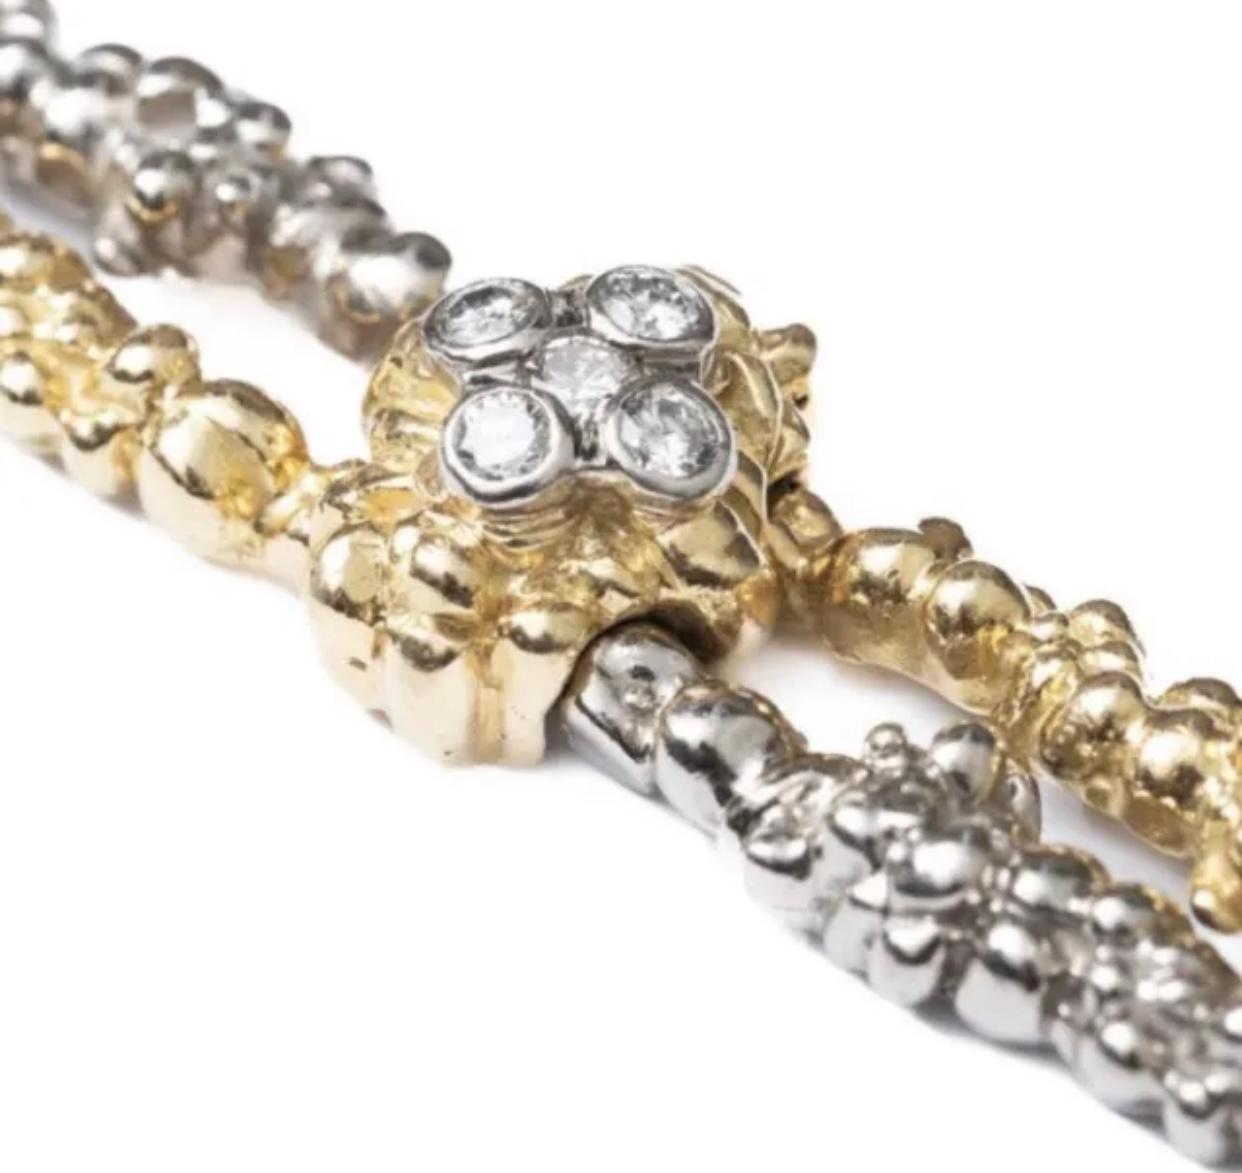 Cartier 18k Two Tone Nugget Gold Diamond approx 1.10 ct tw Bracelet.

Cartier 18 kt. yellow and white gold, 30 round diamonds ap. 1.10 ct tw signed Cartier, France, with maker's mark and French assay marks, ap. 32 dwts.

Length 7 inches. Width 1/2 &